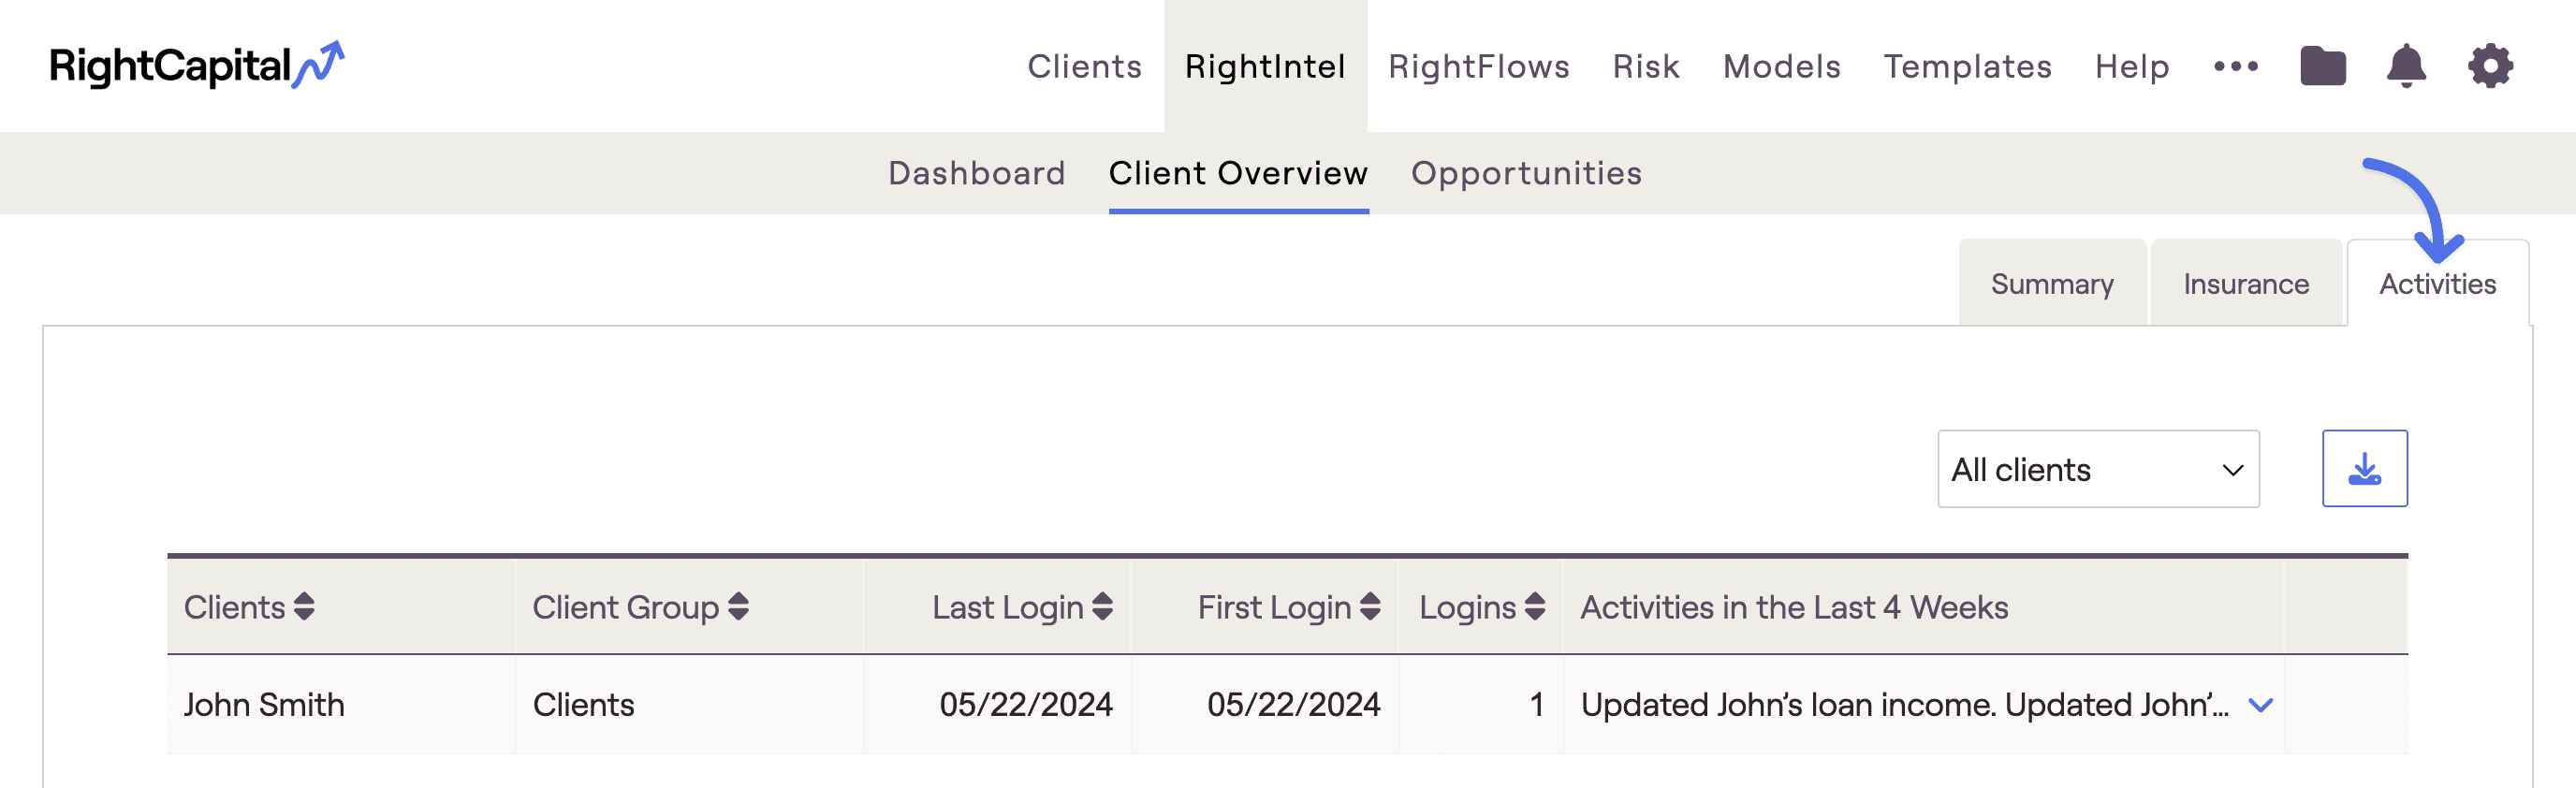 RightCapital screenshot of RightIntel business intelligence dashboard with client activity